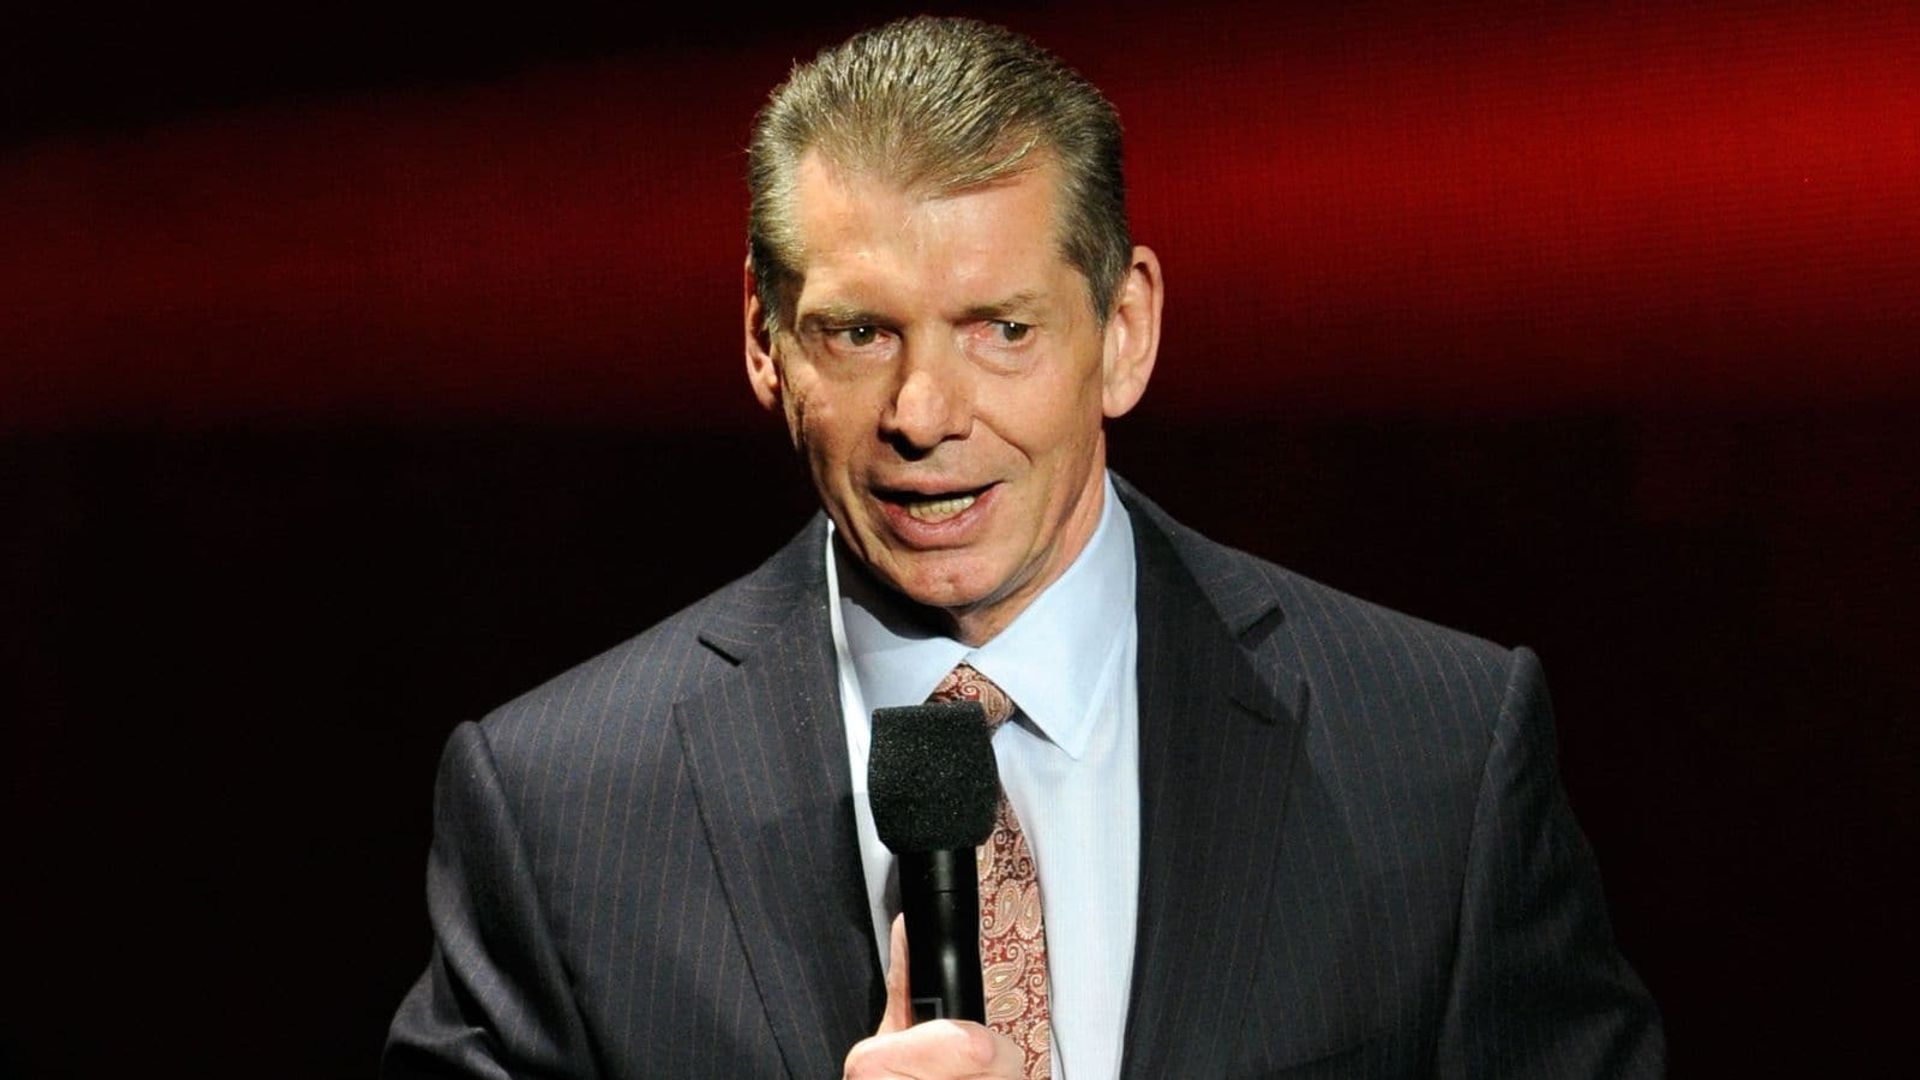 The Nine Lives of Vince McMahon background